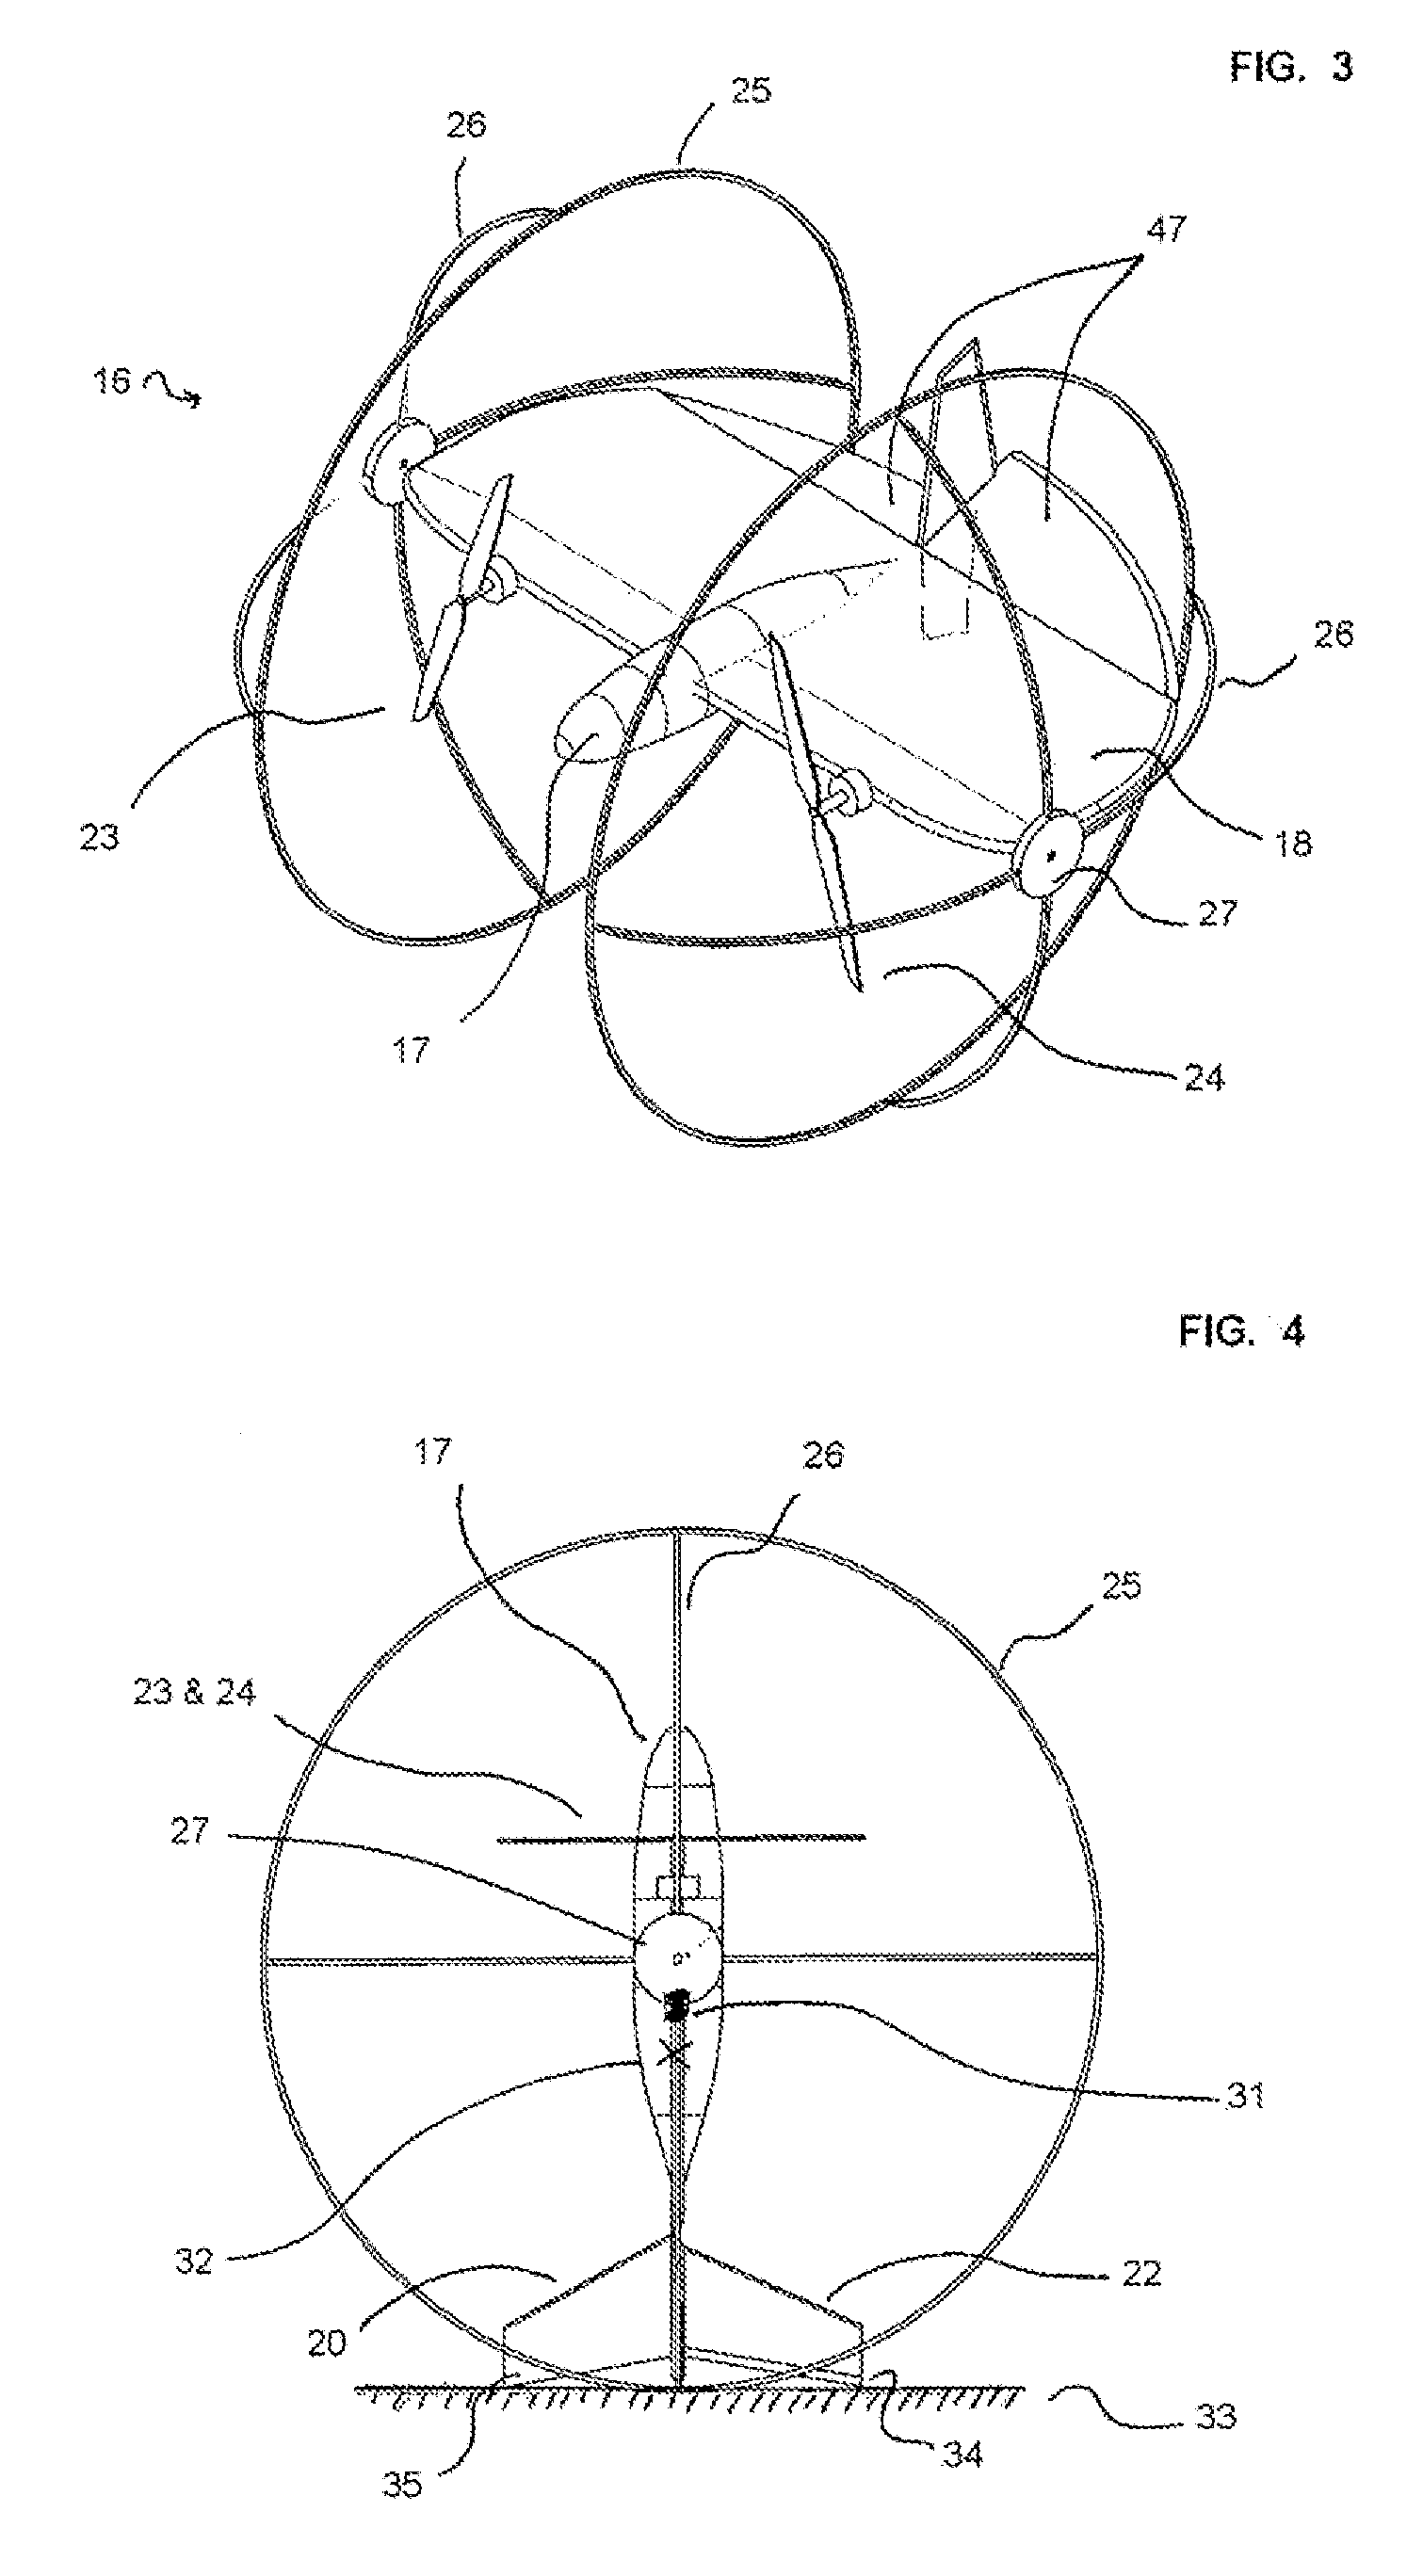 Remotely controlled micro/nanoscale aerial vehicle comprising a system for traveling on the ground, vertical takeoff, and landing